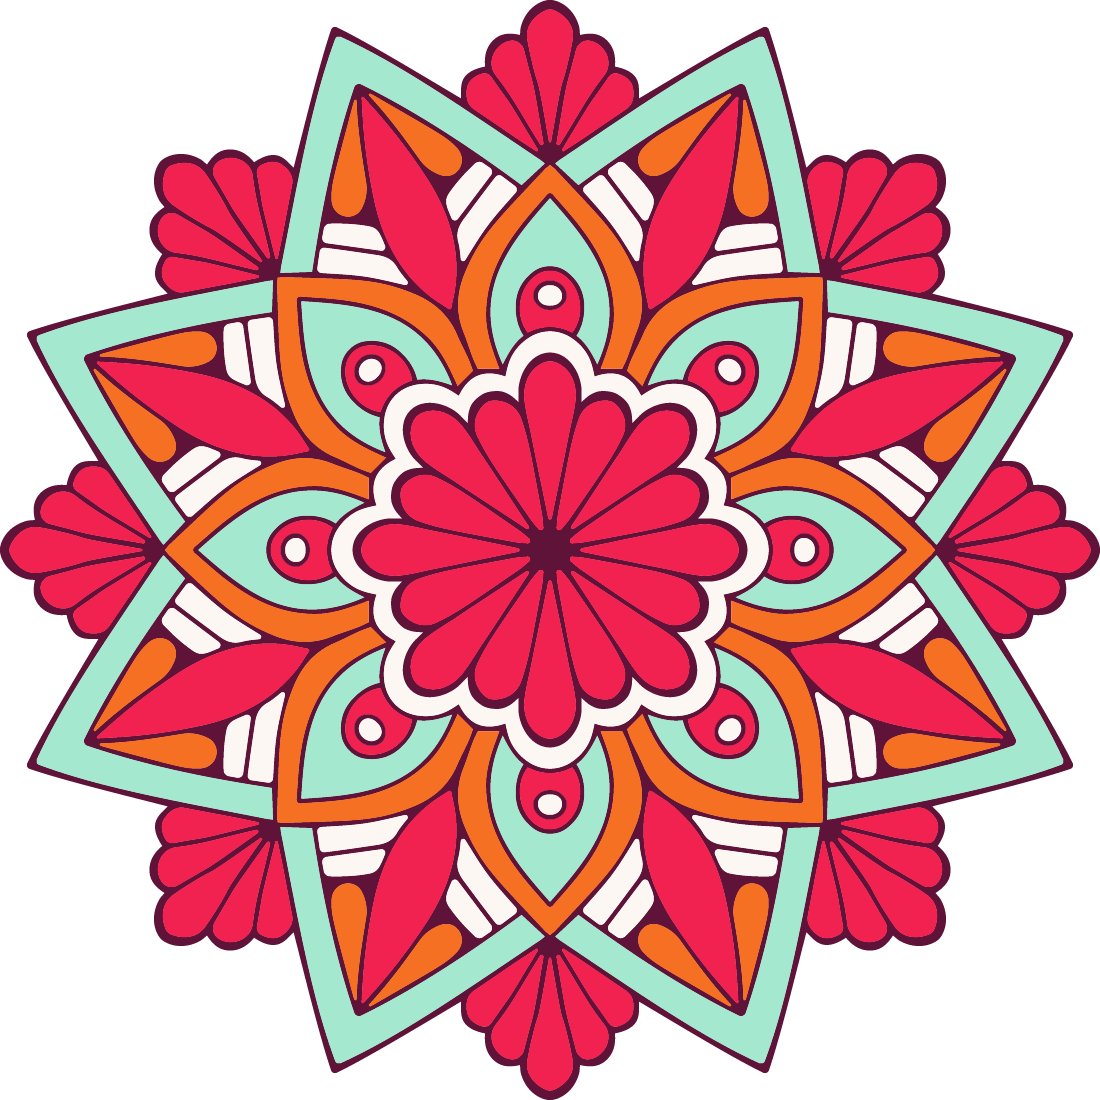 Symmetry Art Cross Embroidery Stitch Free PNG HQ PNG Image